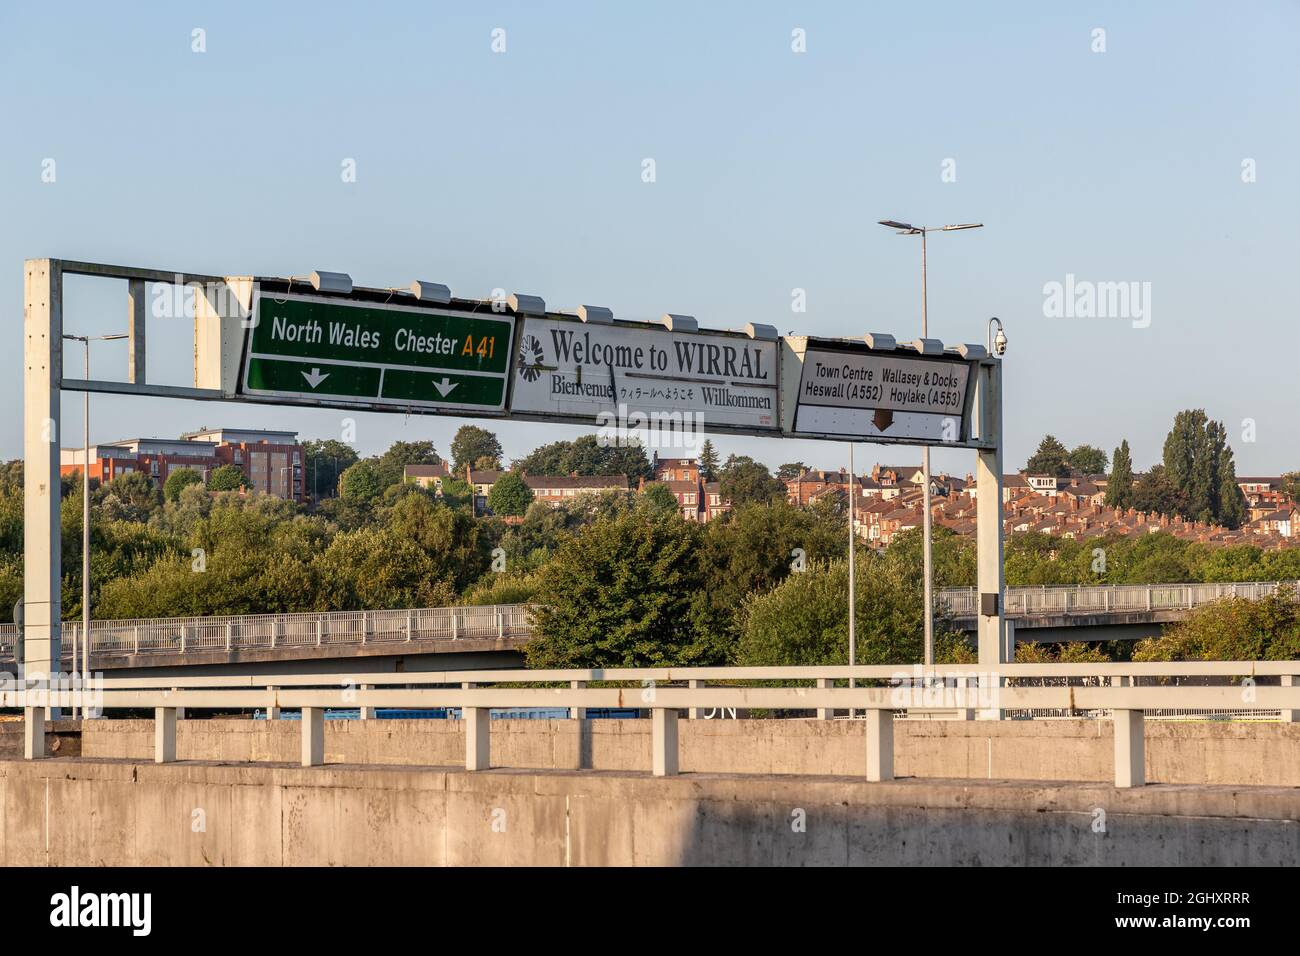 Birkenhead, UK: Welcome to Wirral road sign on A41. Overhead gantry directions to North Wales, Chester, Wallasey and Hoylake. Stock Photo